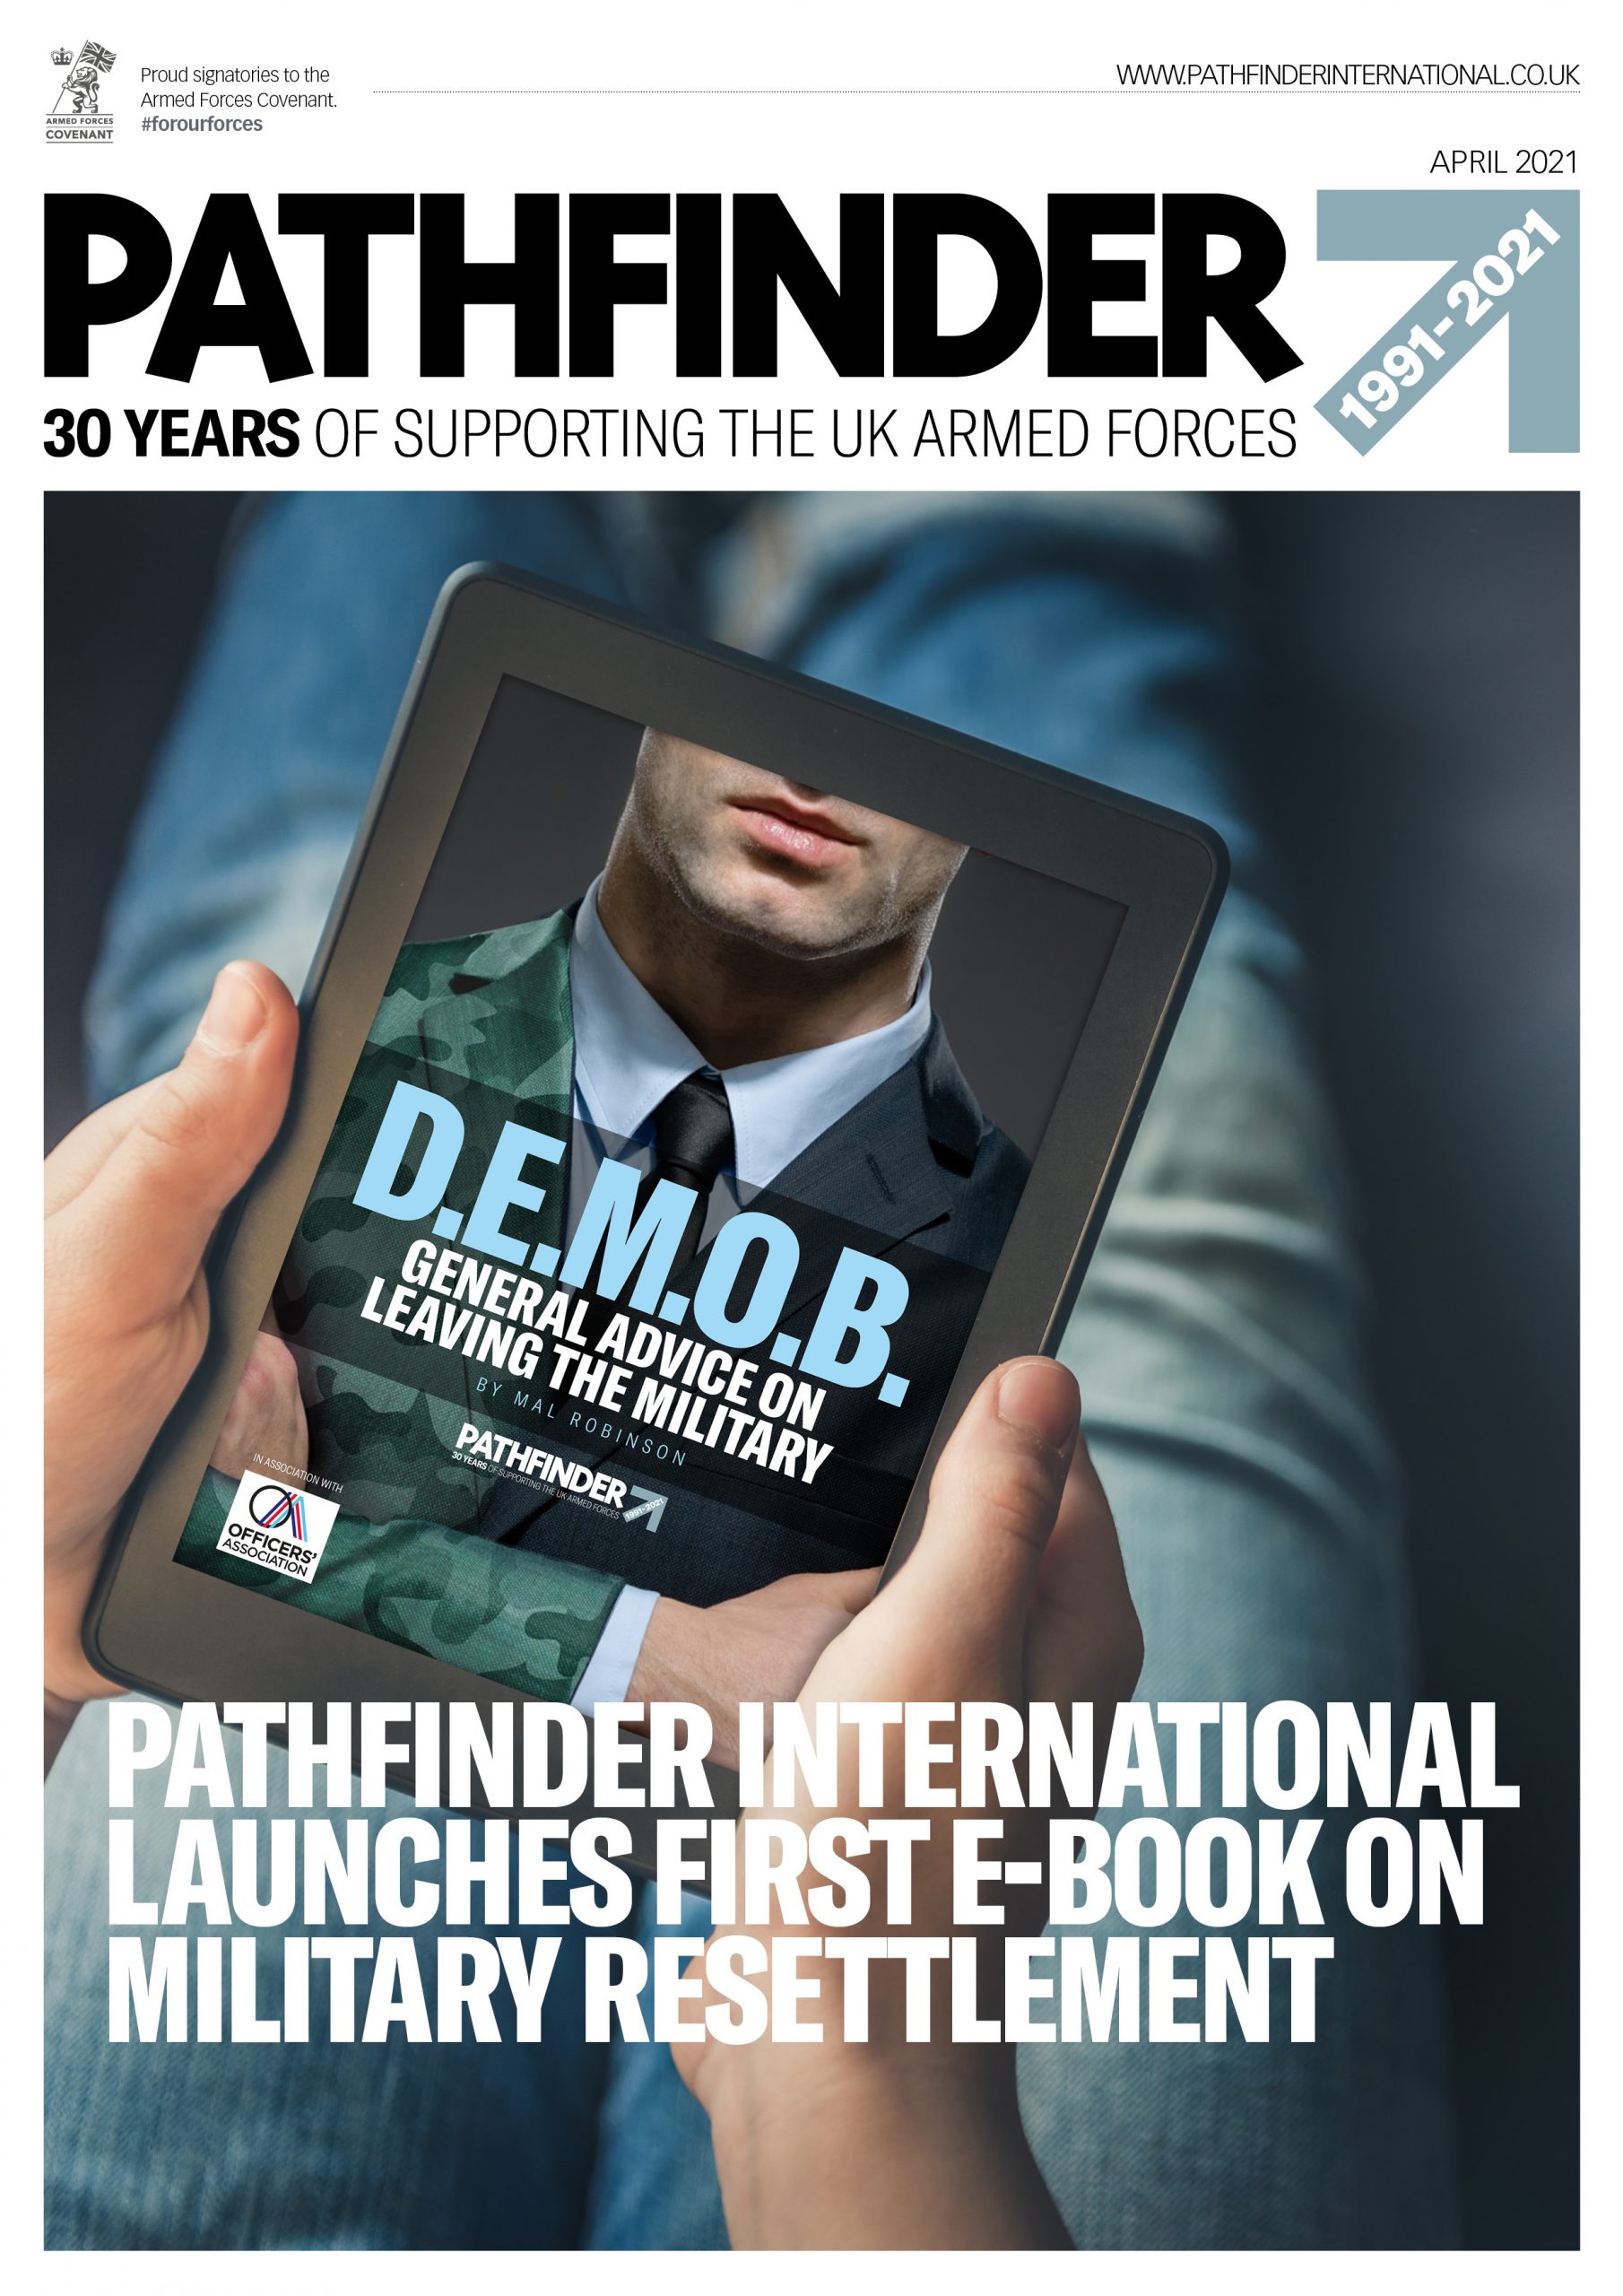 The April Issue Of Pathfinder International Magazine Is Out Now!